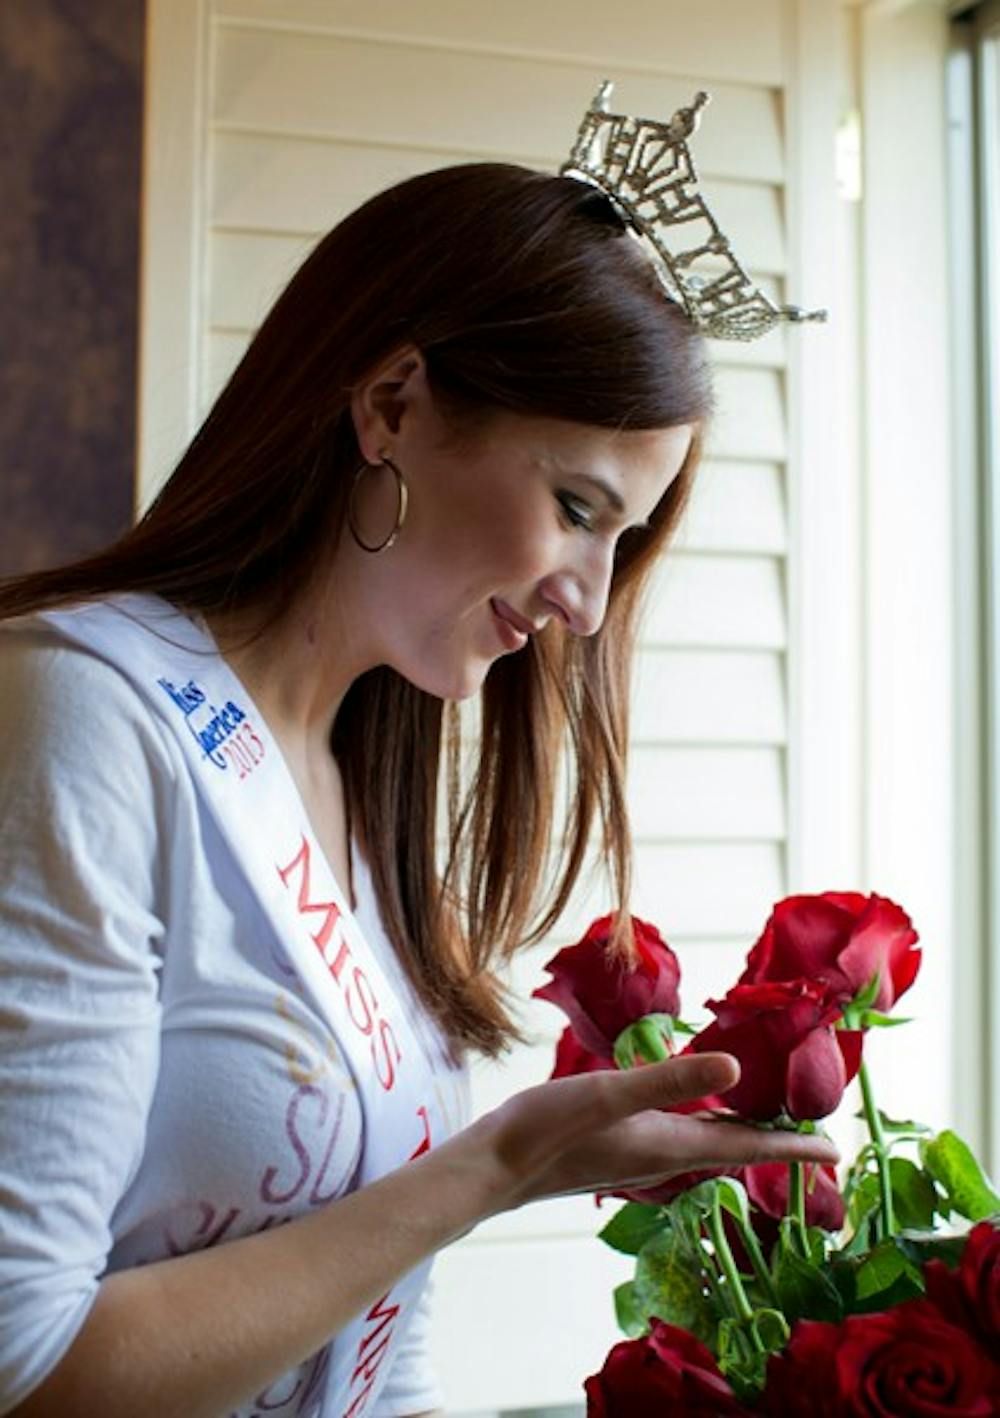 ASU grad student Andrea Malinski admires the roses she got from the pageant and from her boyfriend when she was crowned Miss Tempe one week ago. (Photo by Perla Farias)